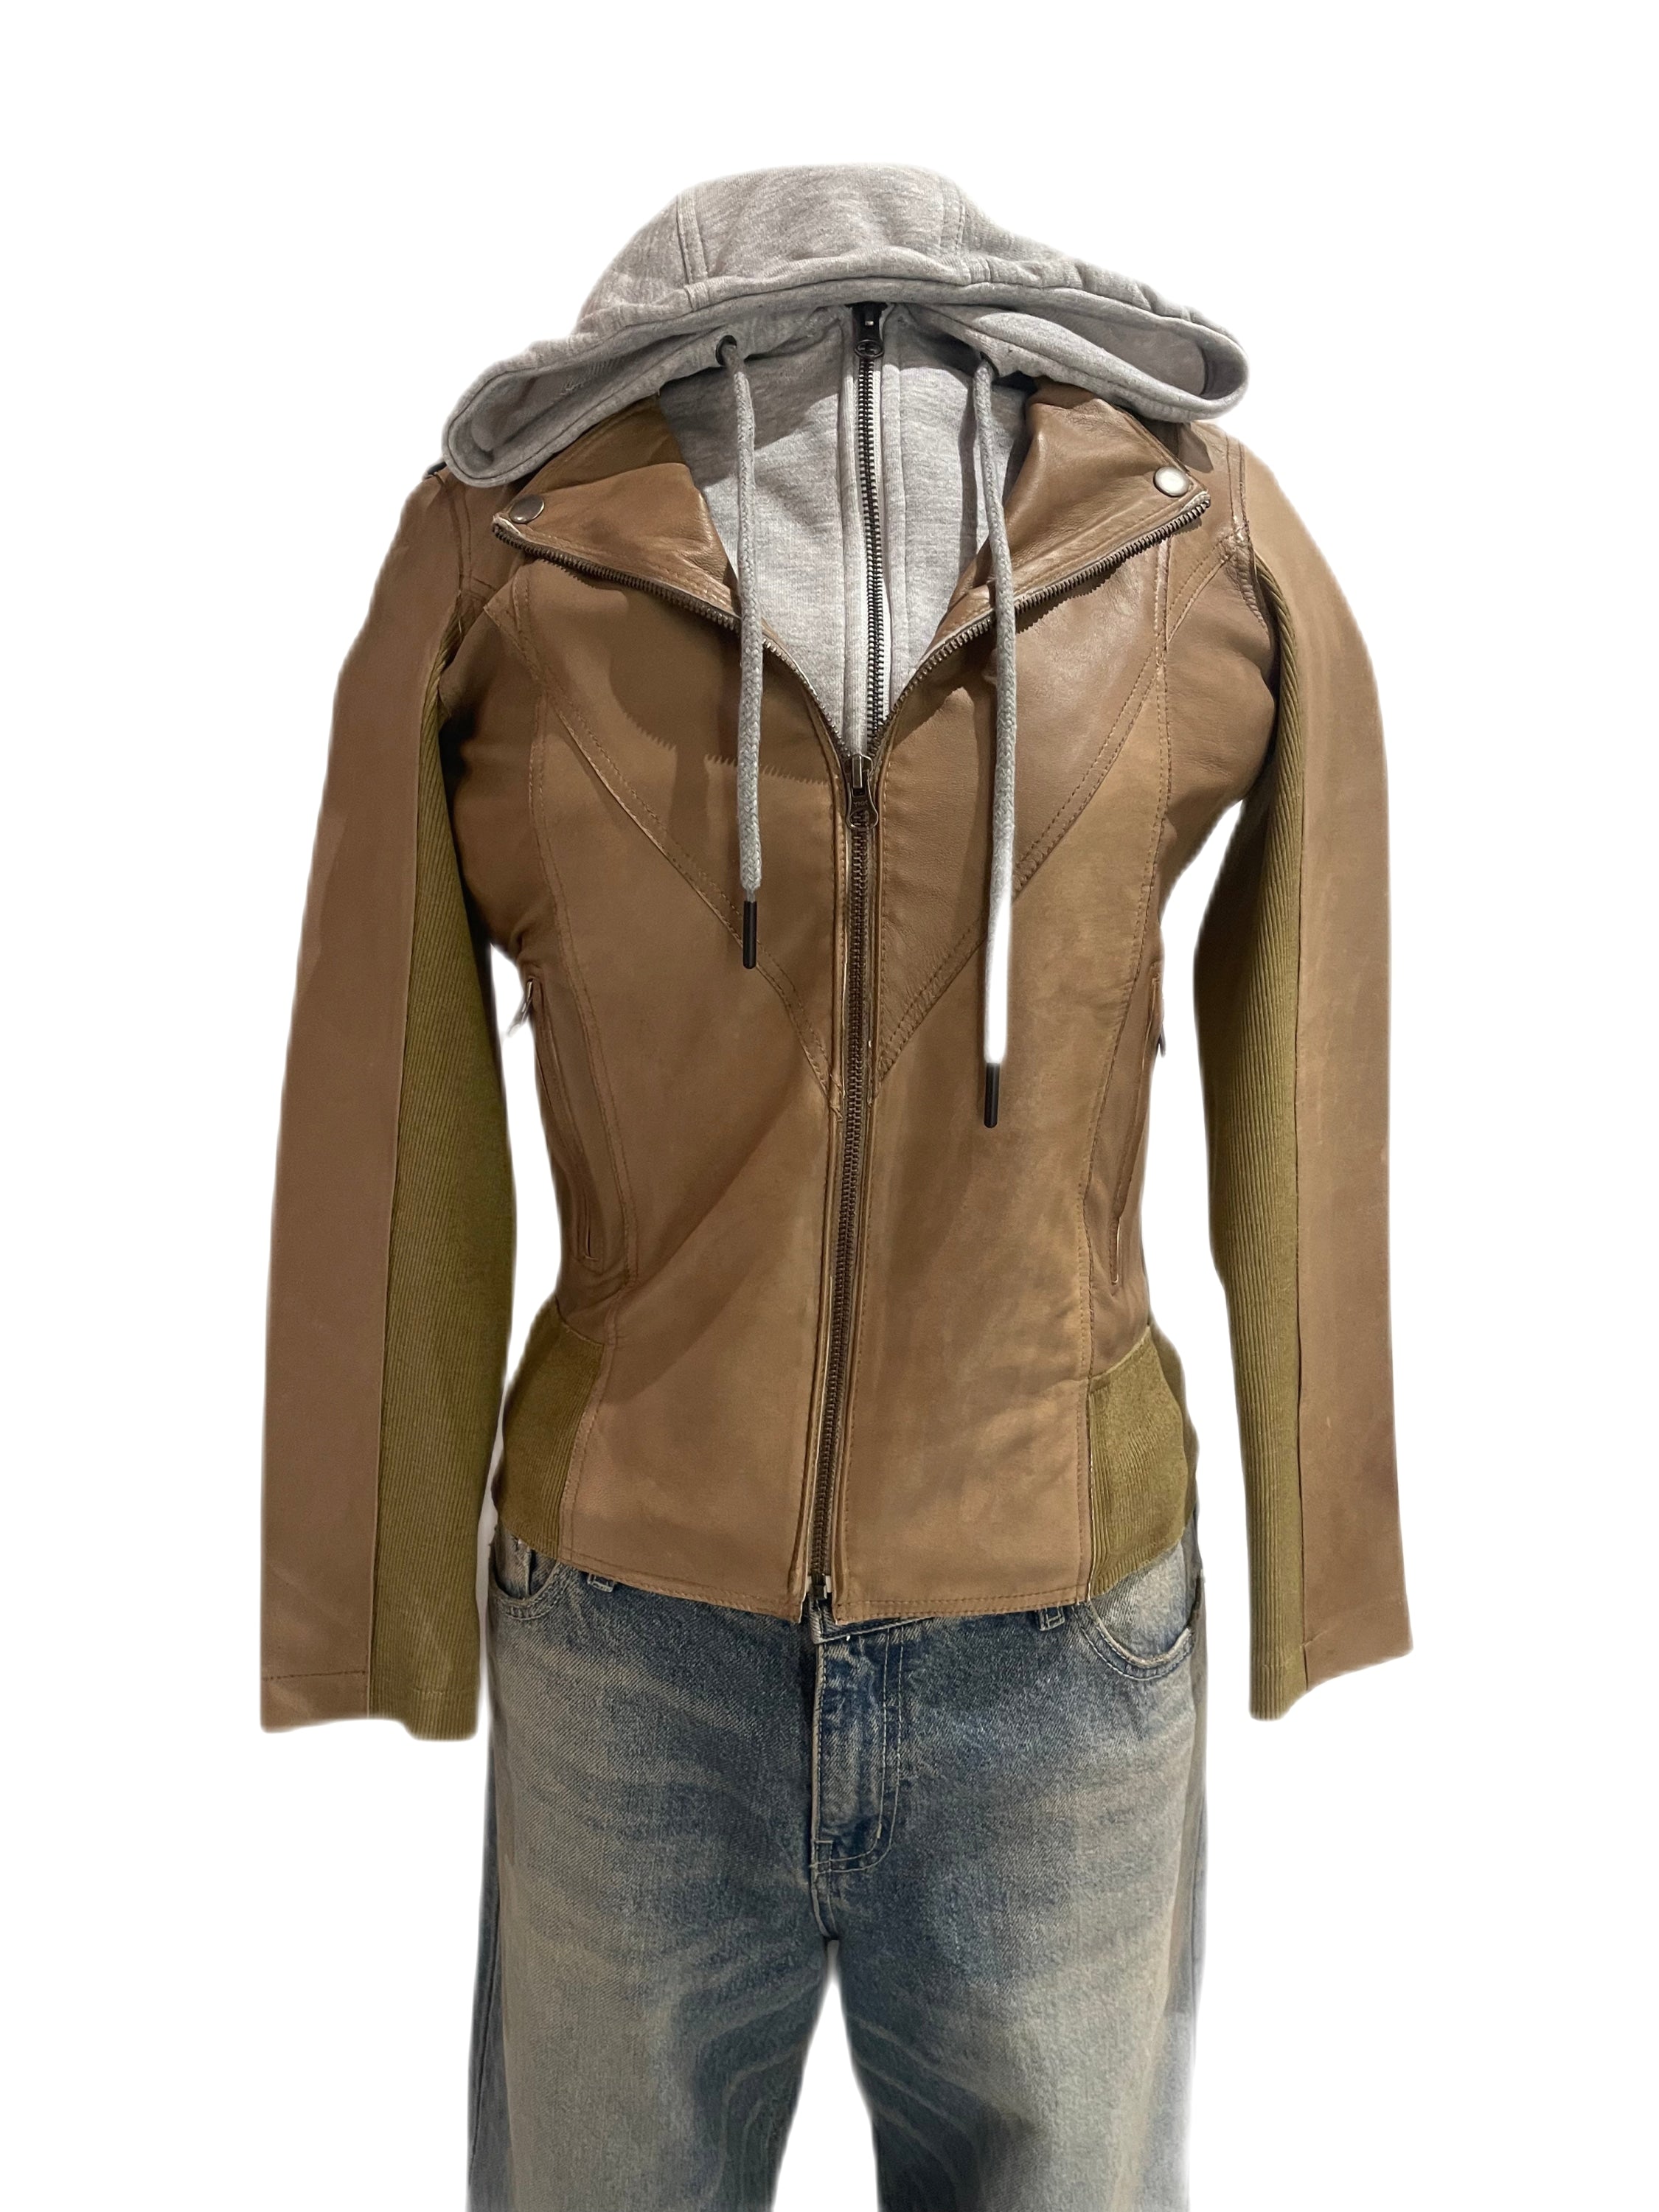 JKT Hannah Patina in Bronze with hood - clever alice